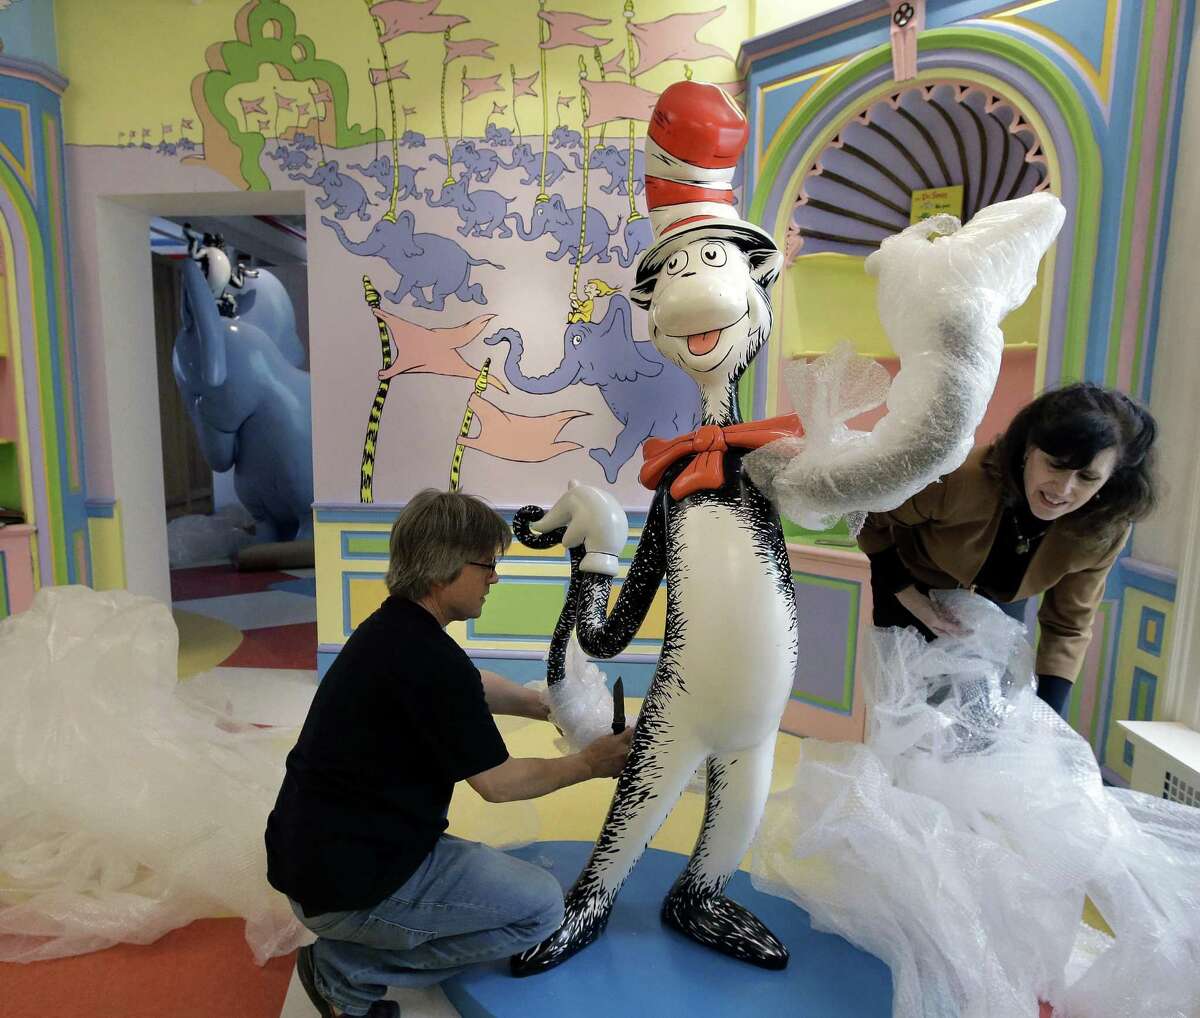 John Simpson (left), project director of exhibitions for The Amazing World of Dr. Seuss Museum, and his wife Kay Simpson (right), president of Springfield Museums, unwrap a statue of the "Cat in the Hat," at the museum in Springfield, Mass. The museum devoted to Dr. Seuss, which opened on June 3 in his hometown, features interactive exhibits, a collection of personal belongings and explains how the childhood experiences of the man, whose real name is Theodor Geisel, shaped his work.